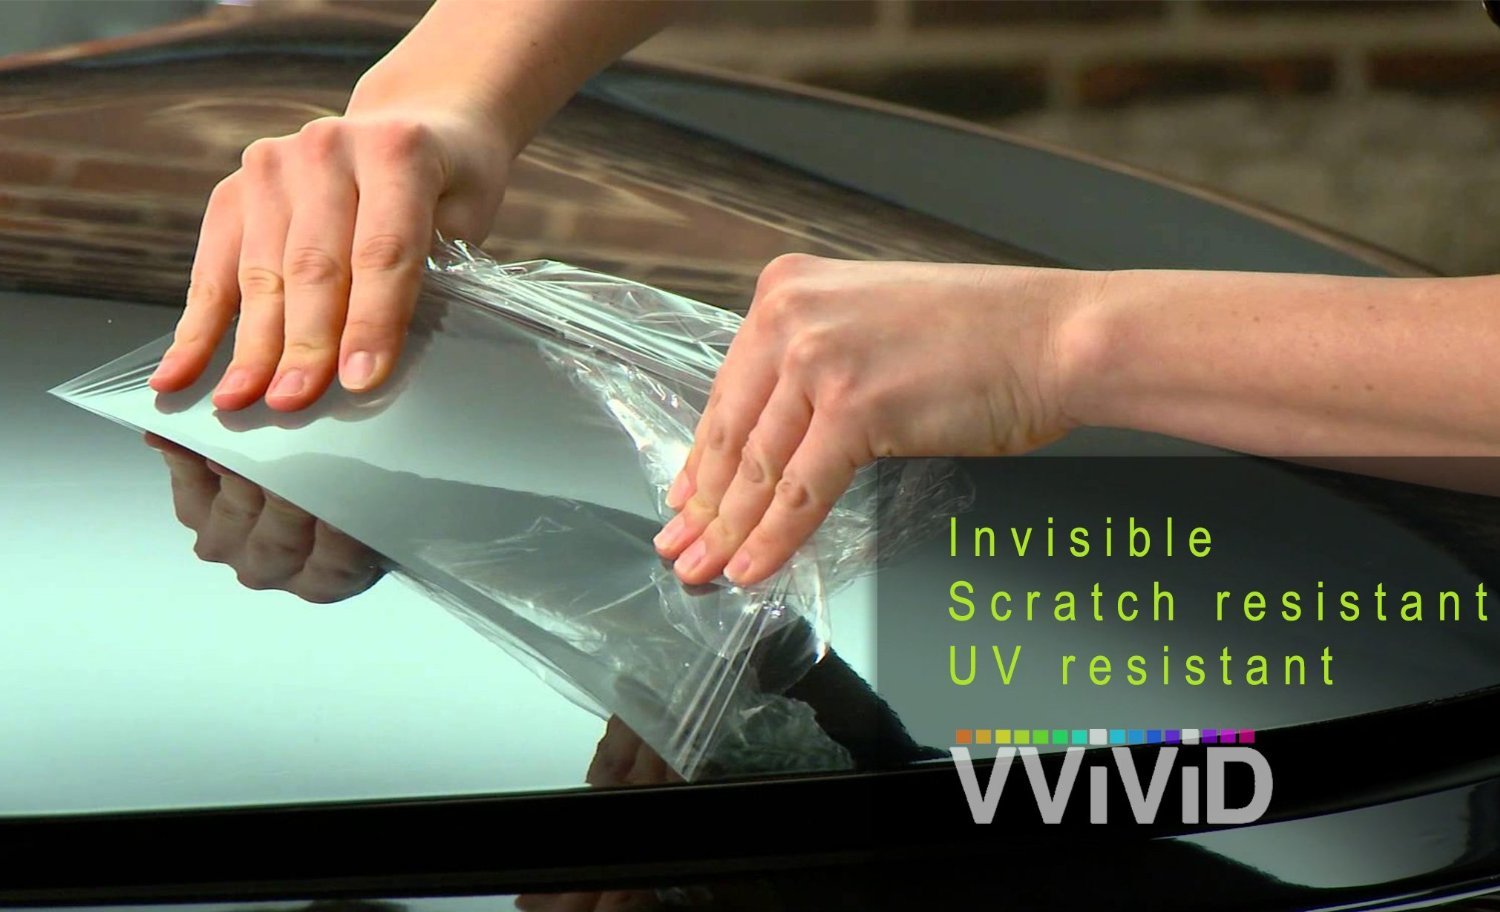 VViViD Clear Bra Paint Protection Bulk Vinyl Wrap Film 8 Inch x 72 Inch Including 3M Squeegee and Black Felt Applicator